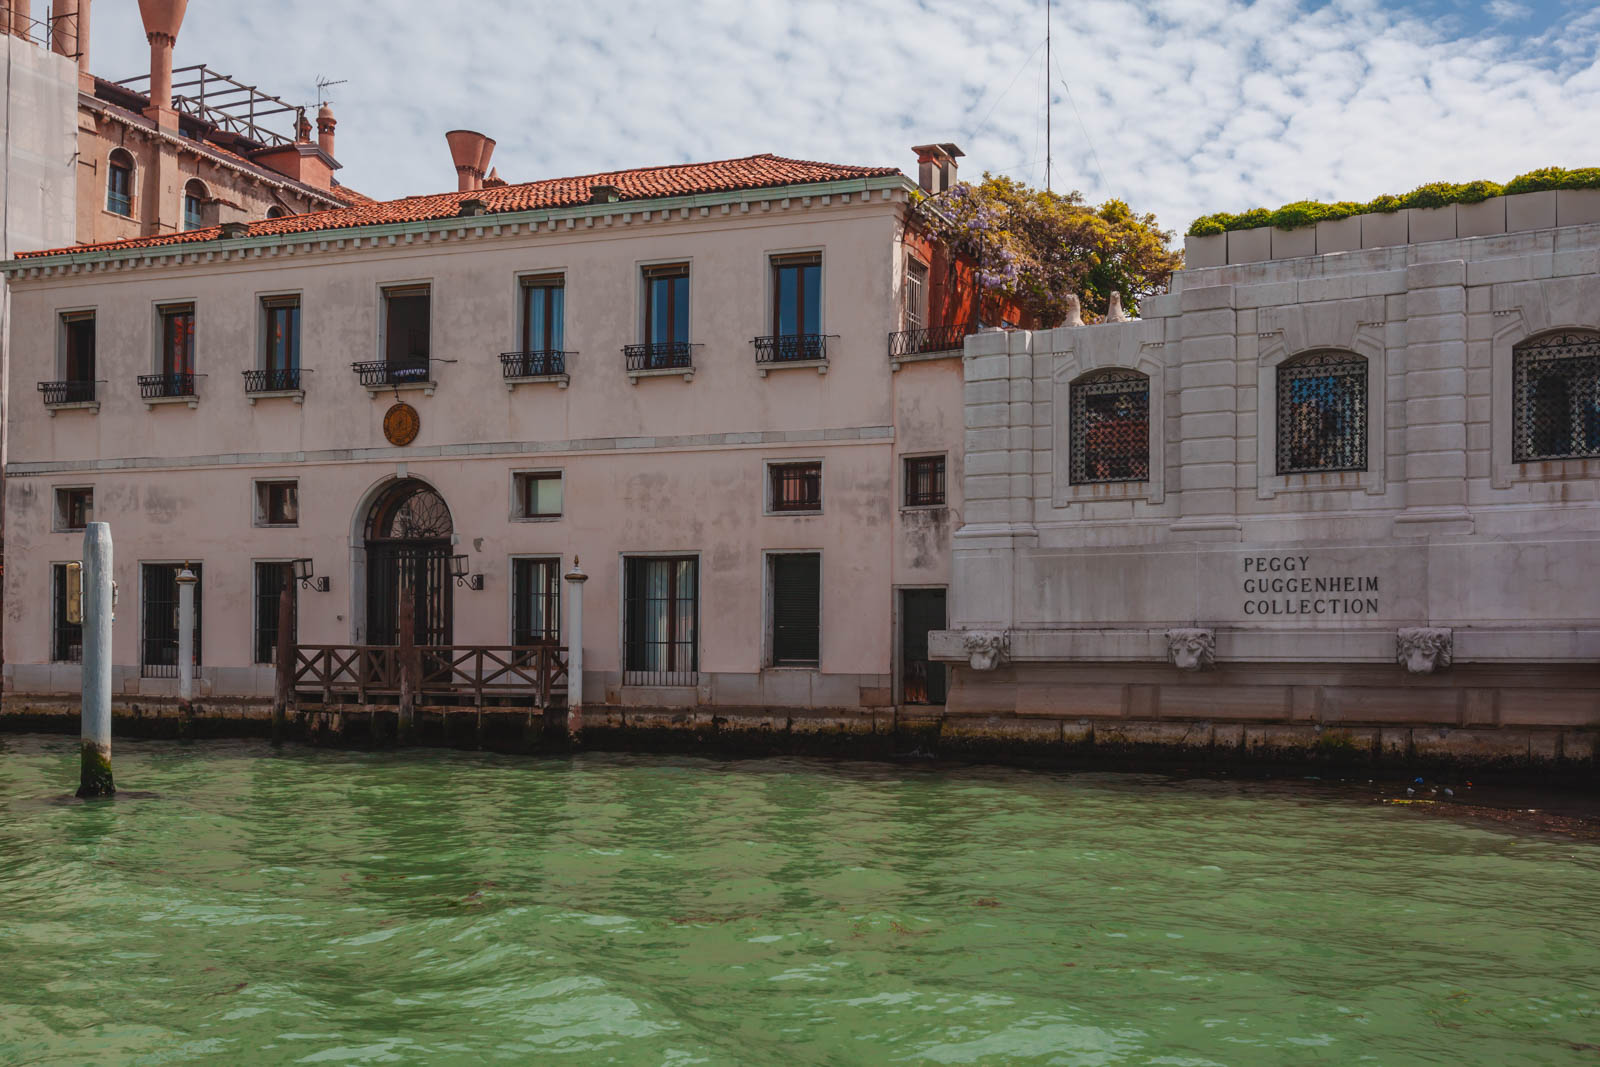 Where to stay in Venice Italy Dorsoduro Pros and cons